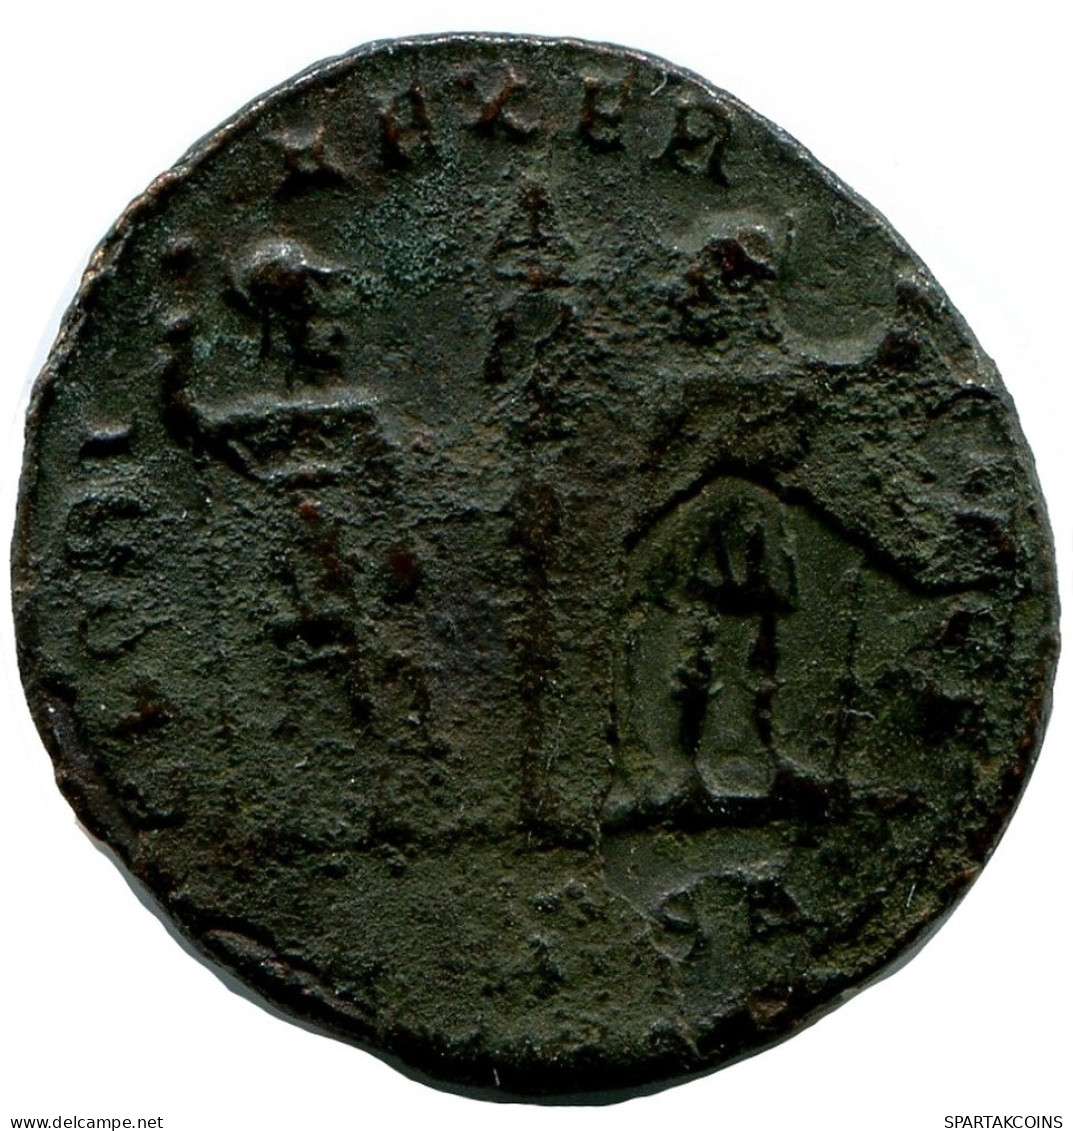 CONSTANTINE I MINTED IN CONSTANTINOPLE FOUND IN IHNASYAH HOARD #ANC10813.14.F.A - El Imperio Christiano (307 / 363)